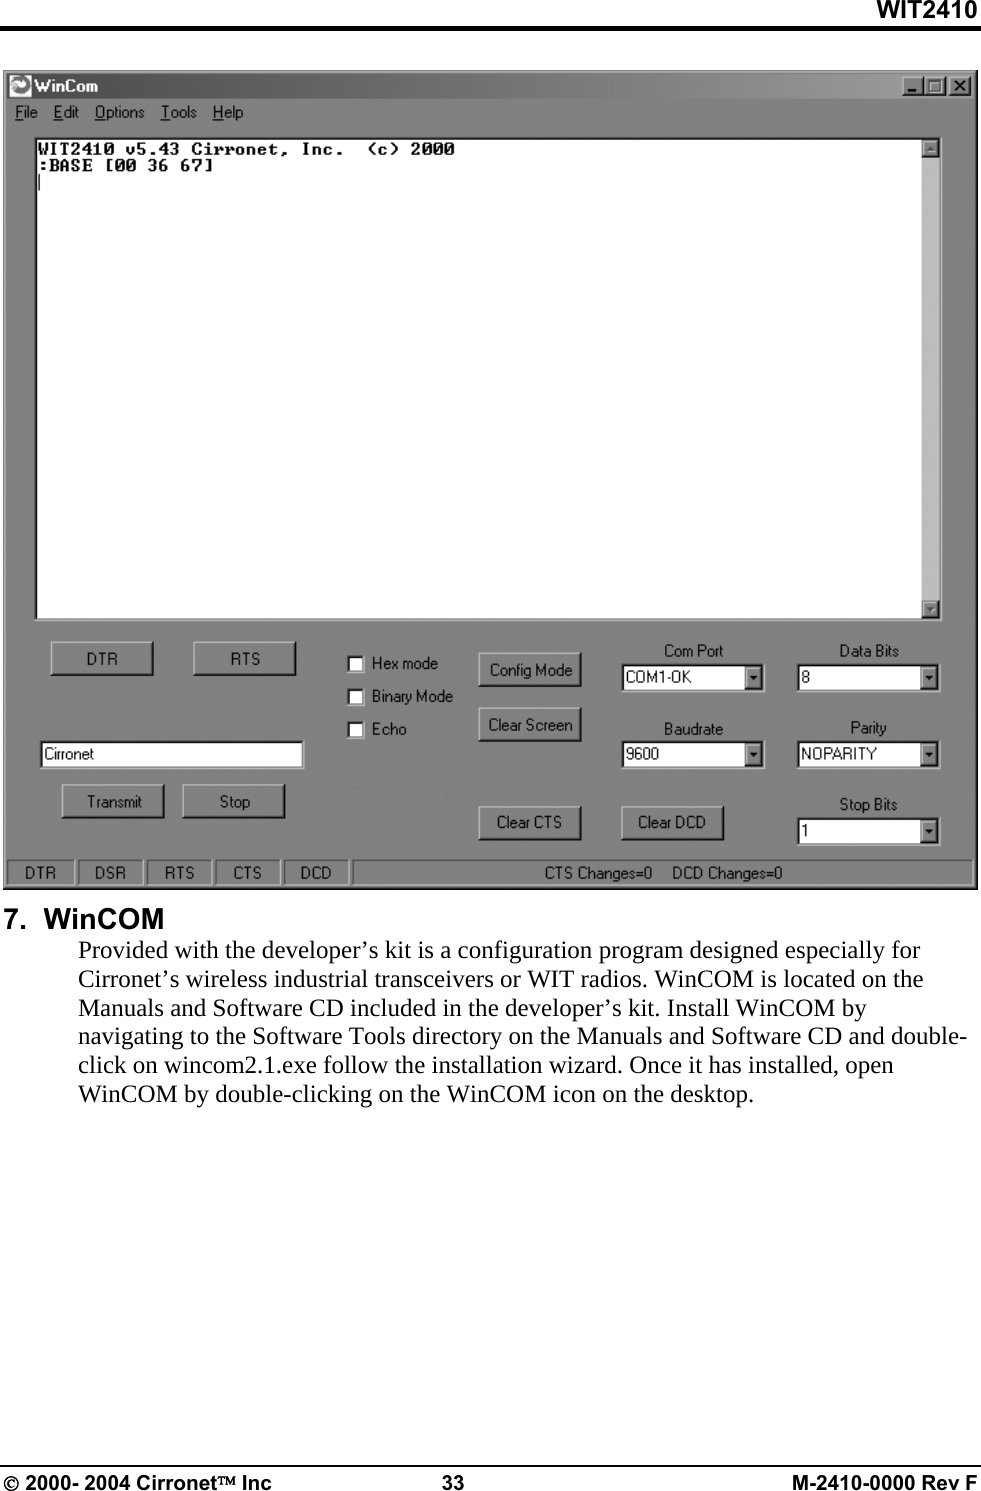 WIT2410  7.  WinCOM Provided with the developer’s kit is a configuration program designed especially for Cirronet’s wireless industrial transceivers or WIT radios. WinCOM is located on the Manuals and Software CD included in the developer’s kit. Install WinCOM by navigating to the Software Tools directory on the Manuals and Software CD and double-click on wincom2.1.exe follow the installation wizard. Once it has installed, open WinCOM by double-clicking on the WinCOM icon on the desktop. © 2000- 2004 Cirronet™ Inc  33  M-2410-0000 Rev F 